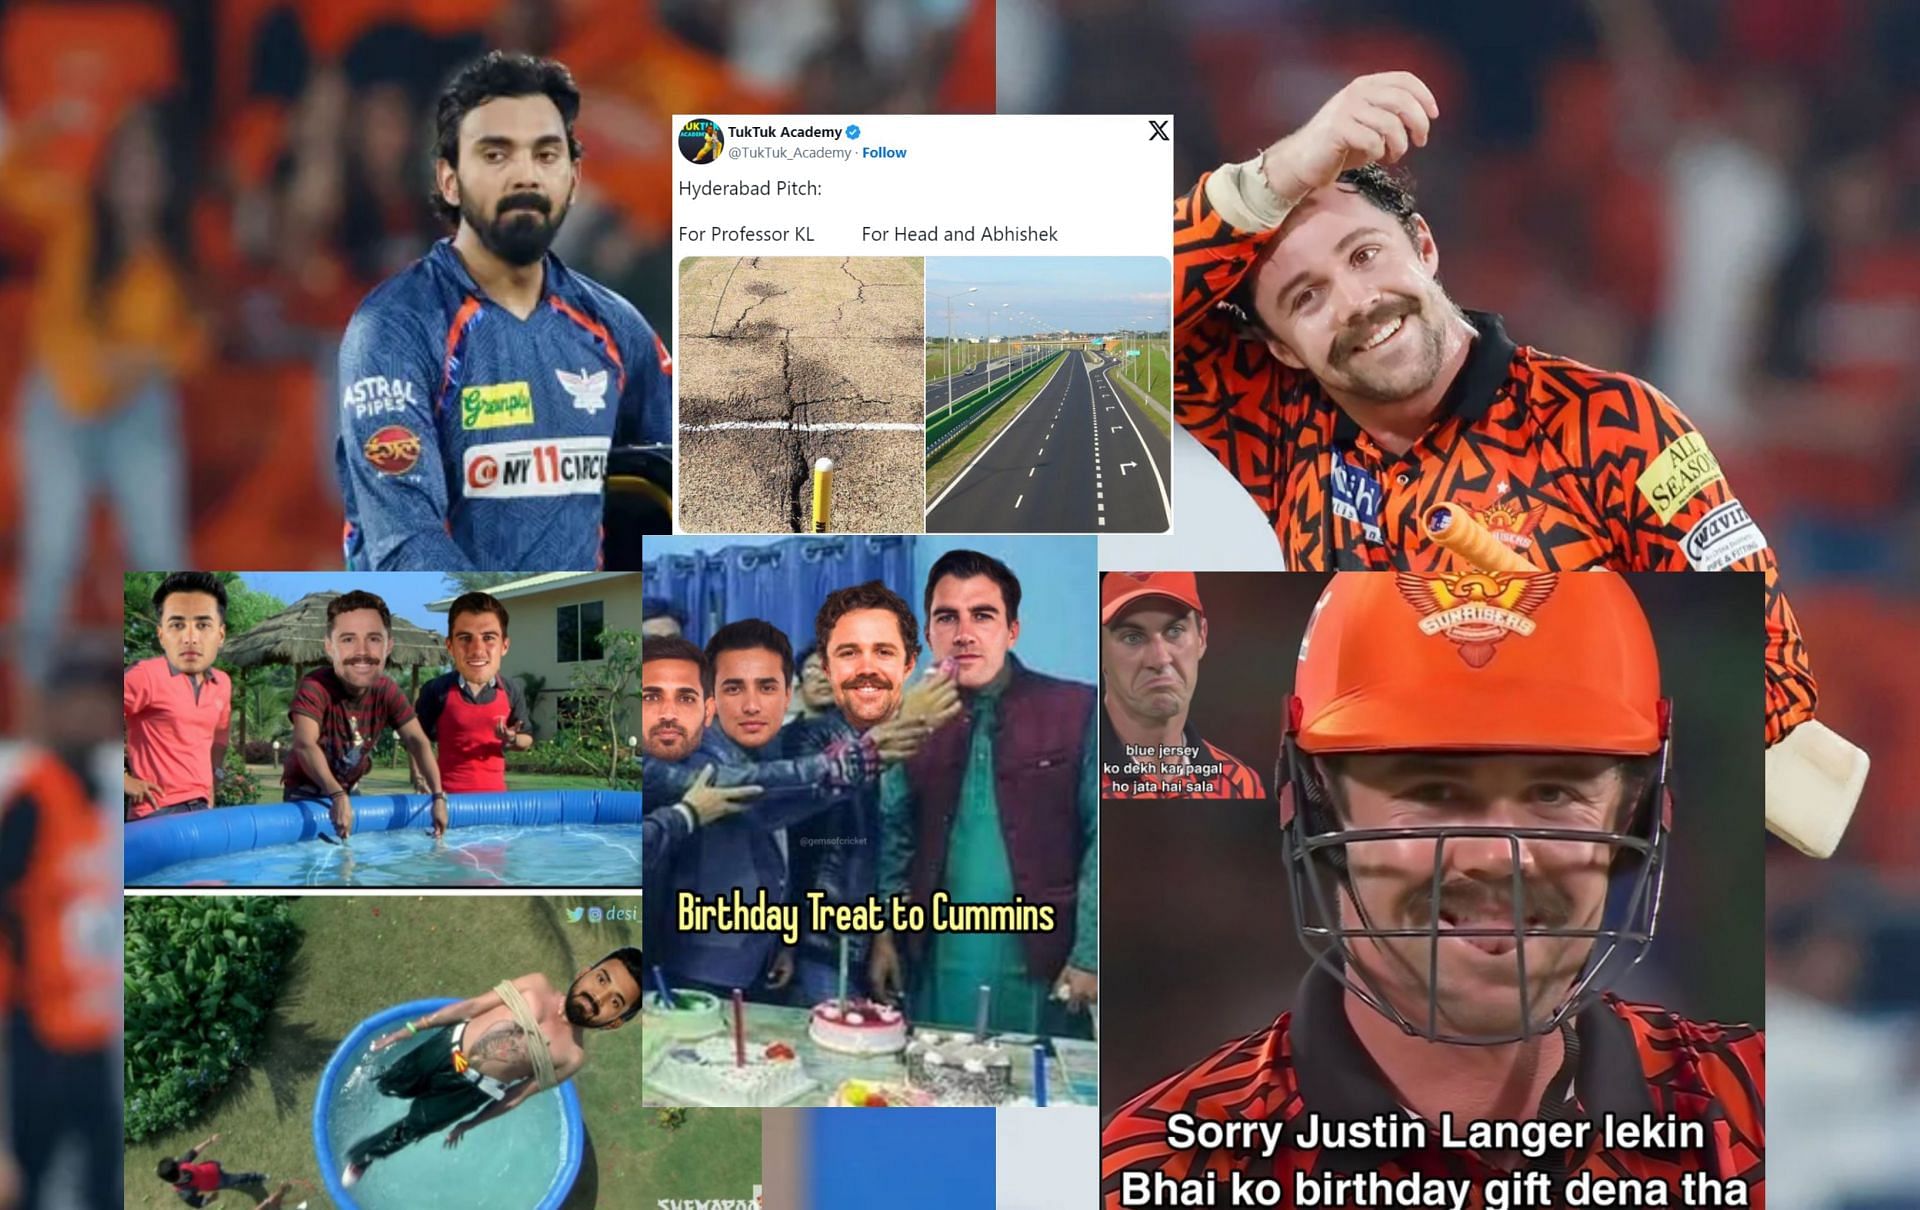 Top 10 funny memes from the latest IPL match.